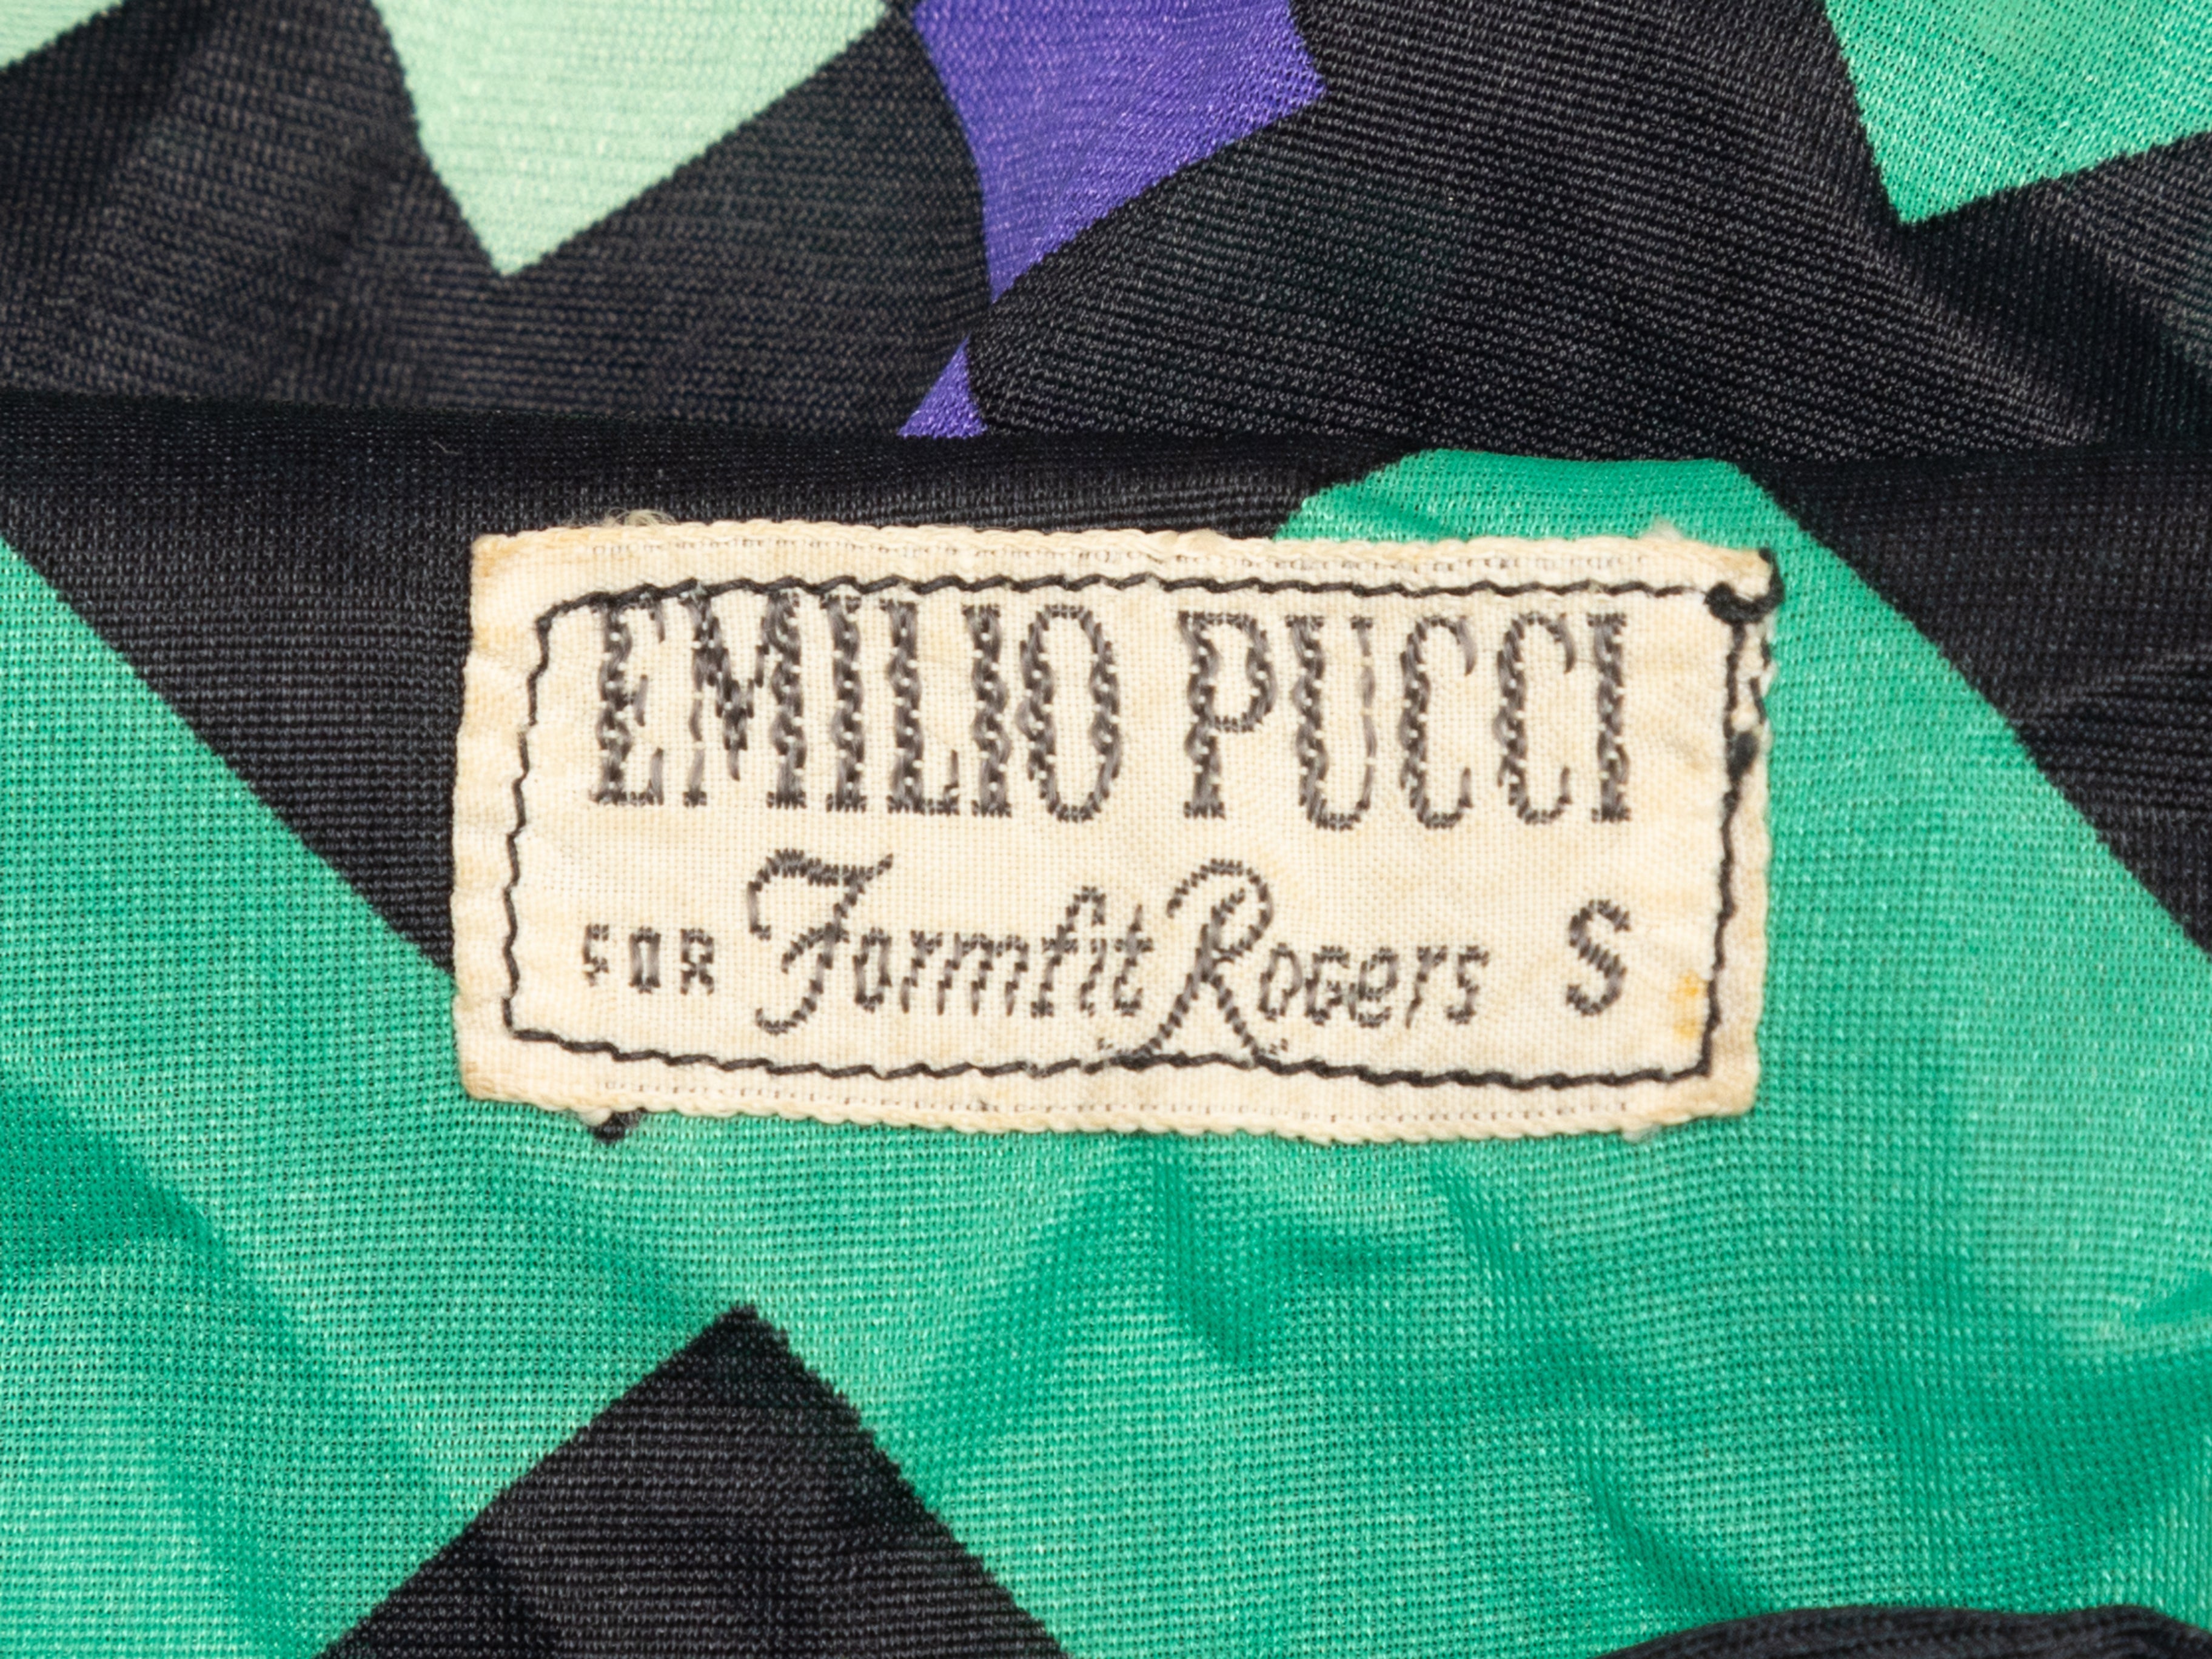 Dressed for Bed: Emilio Pucci for Formfit Rogers, 1959-1970's